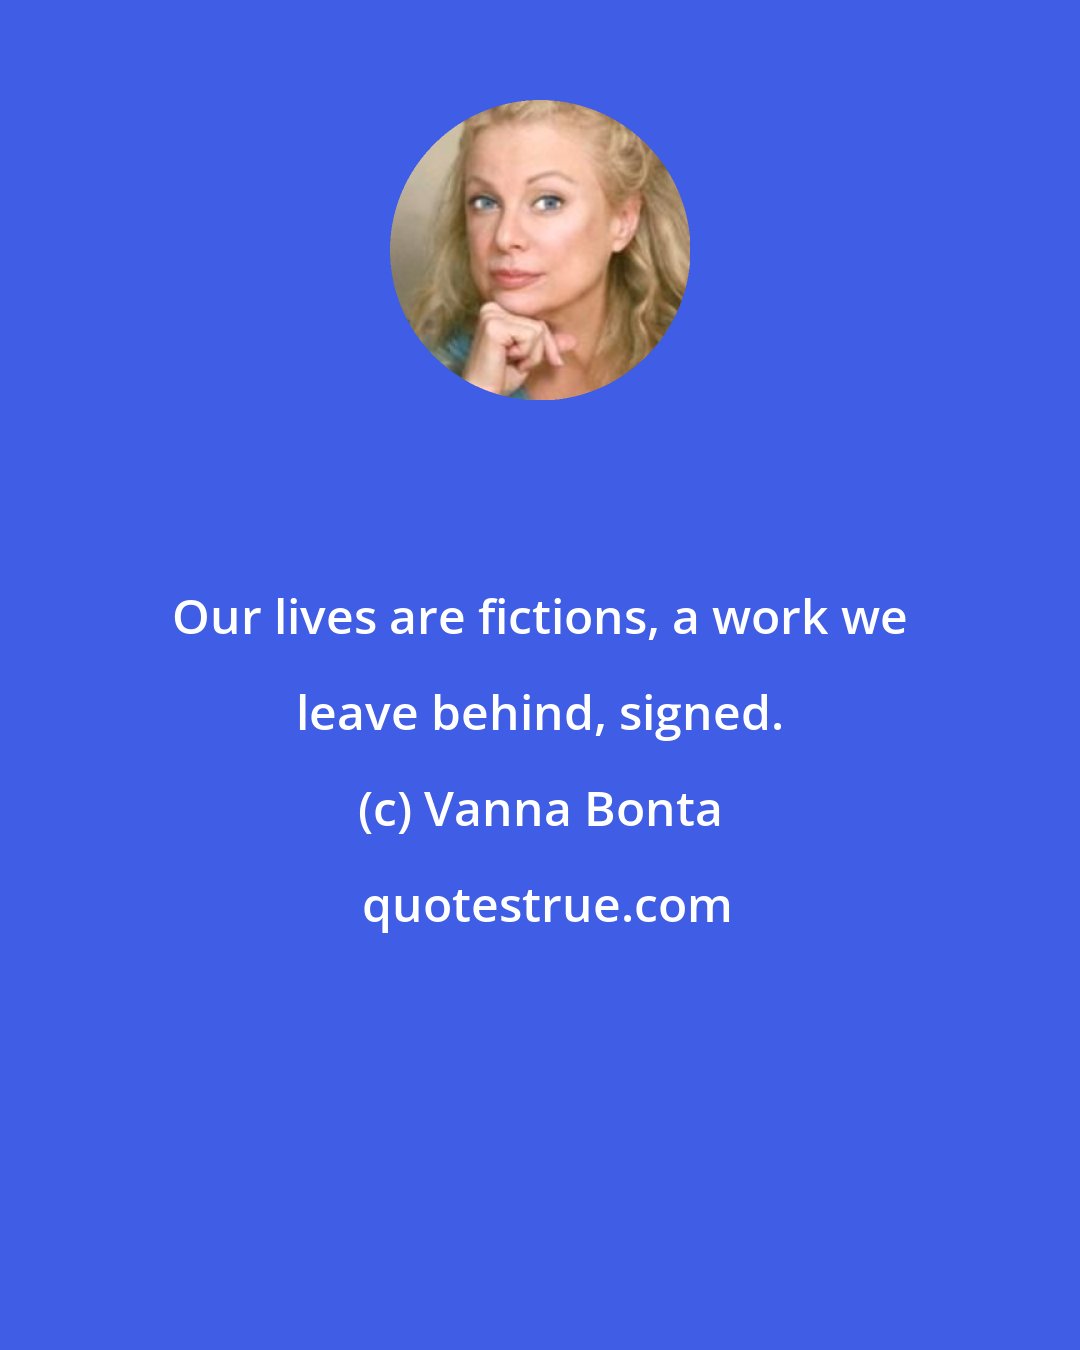 Vanna Bonta: Our lives are fictions, a work we leave behind, signed.